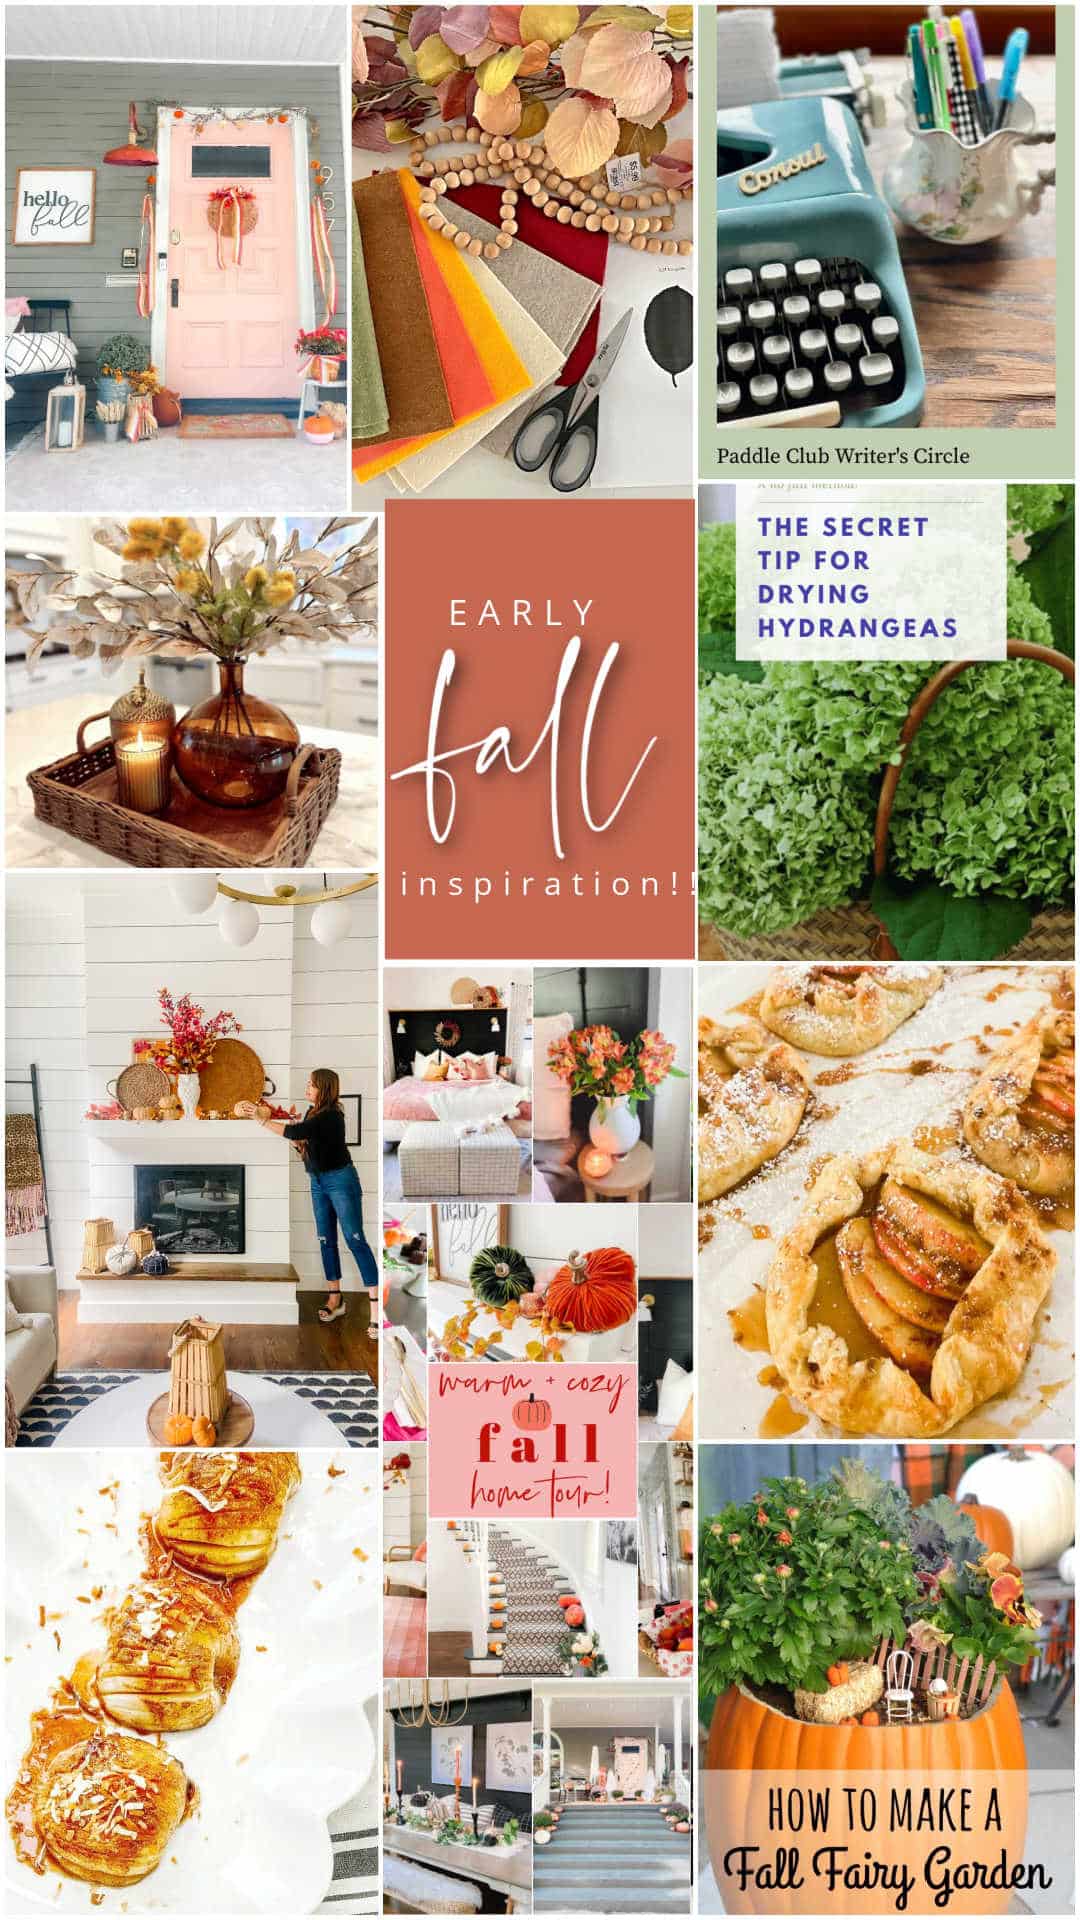 Early Fall Inspiration! Get ready for cozy season with these warm and wonderful fall DIY home ideas and fall recipes!